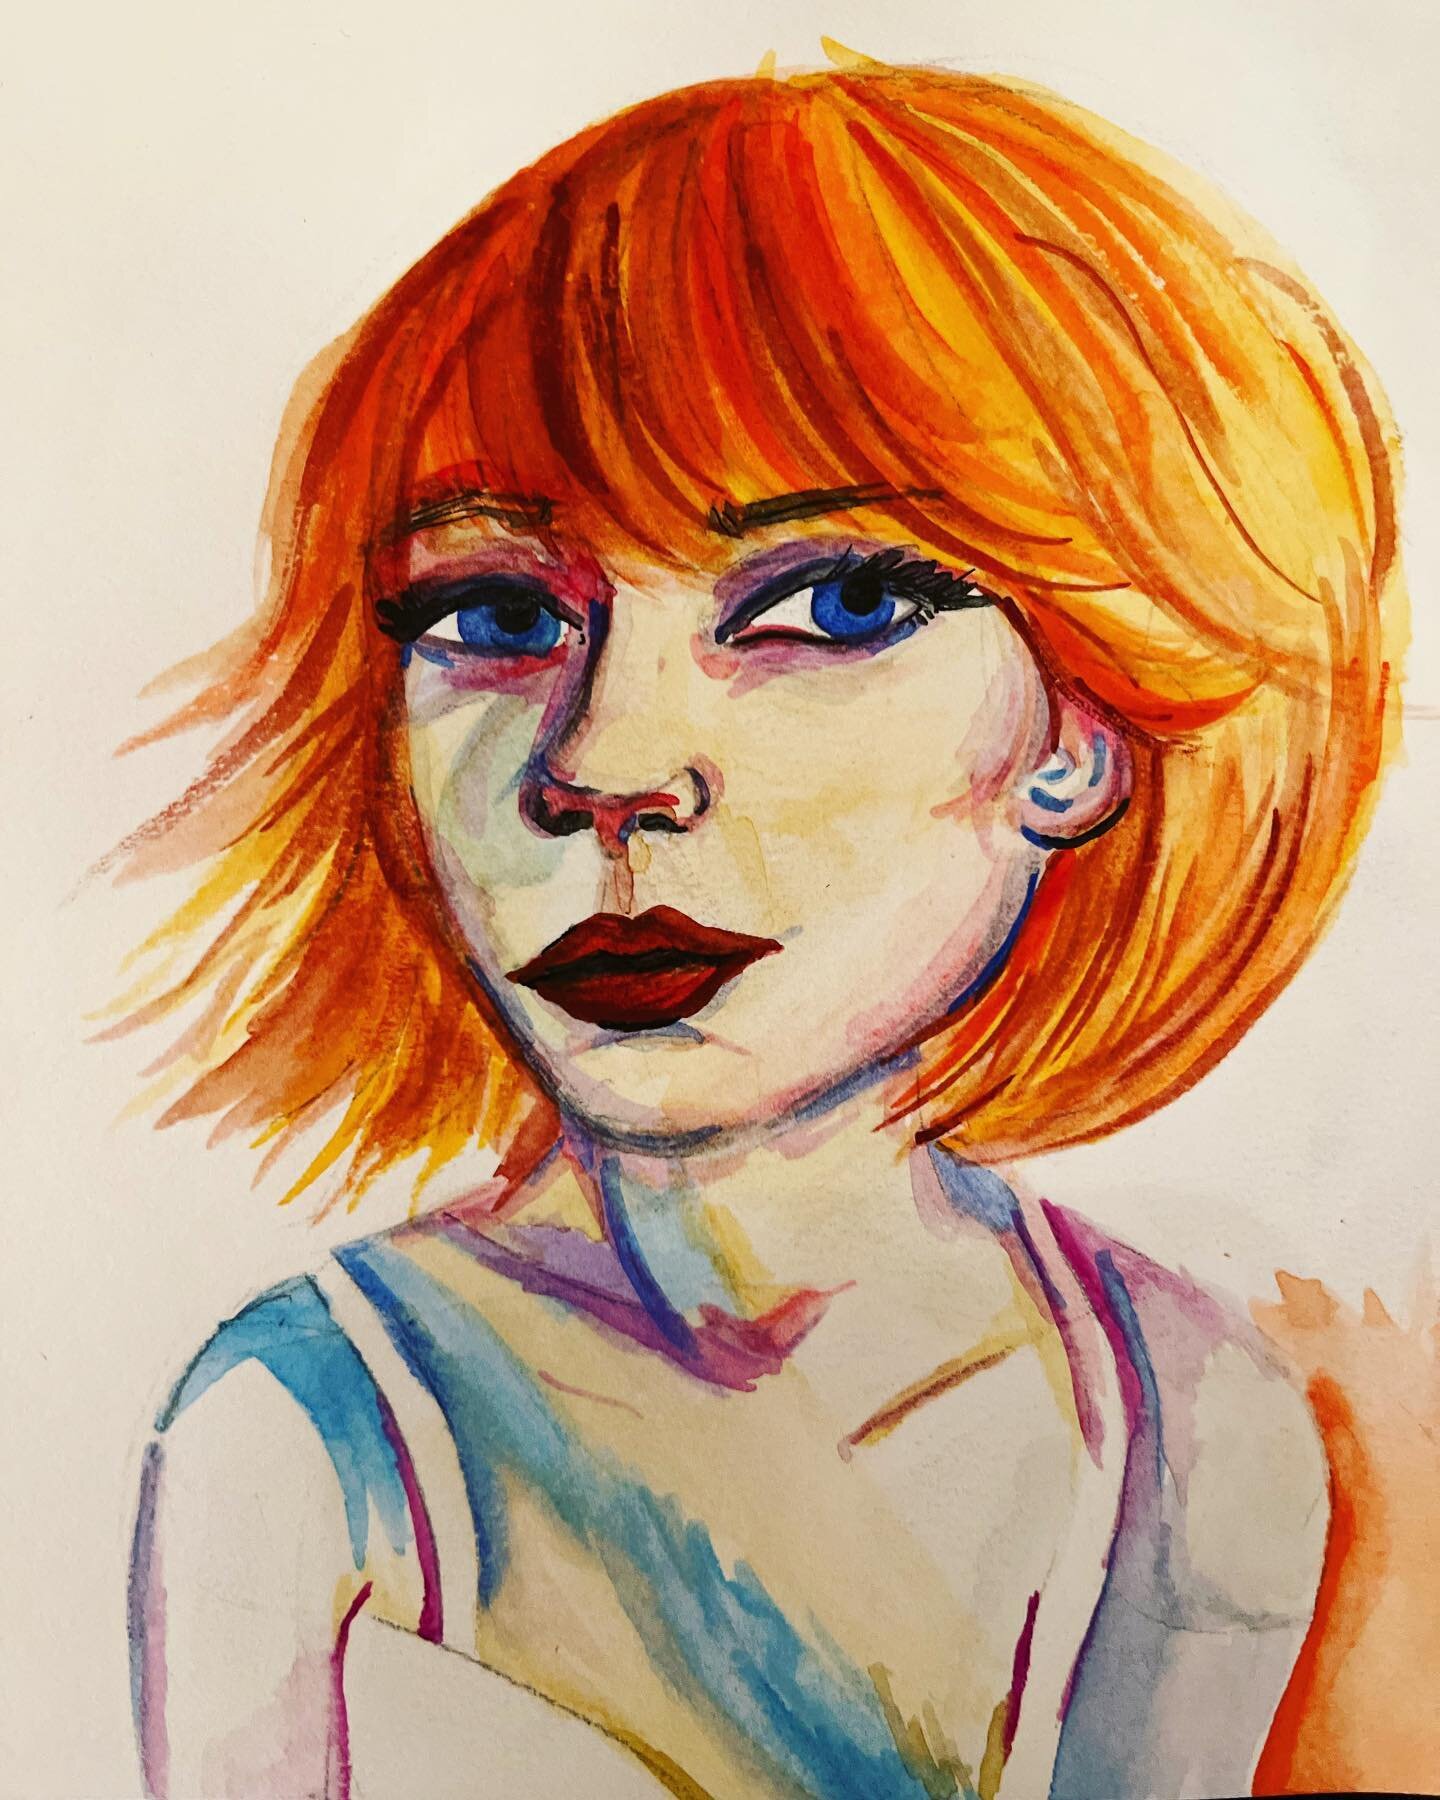 Unfinished self portrait, because when I practice, I feel better fucking up my own face. #watercolor #watercolorportrait #selftaughtartist #selftaughtart #sketchbook #watercolorsketchbook #watercolorpainting